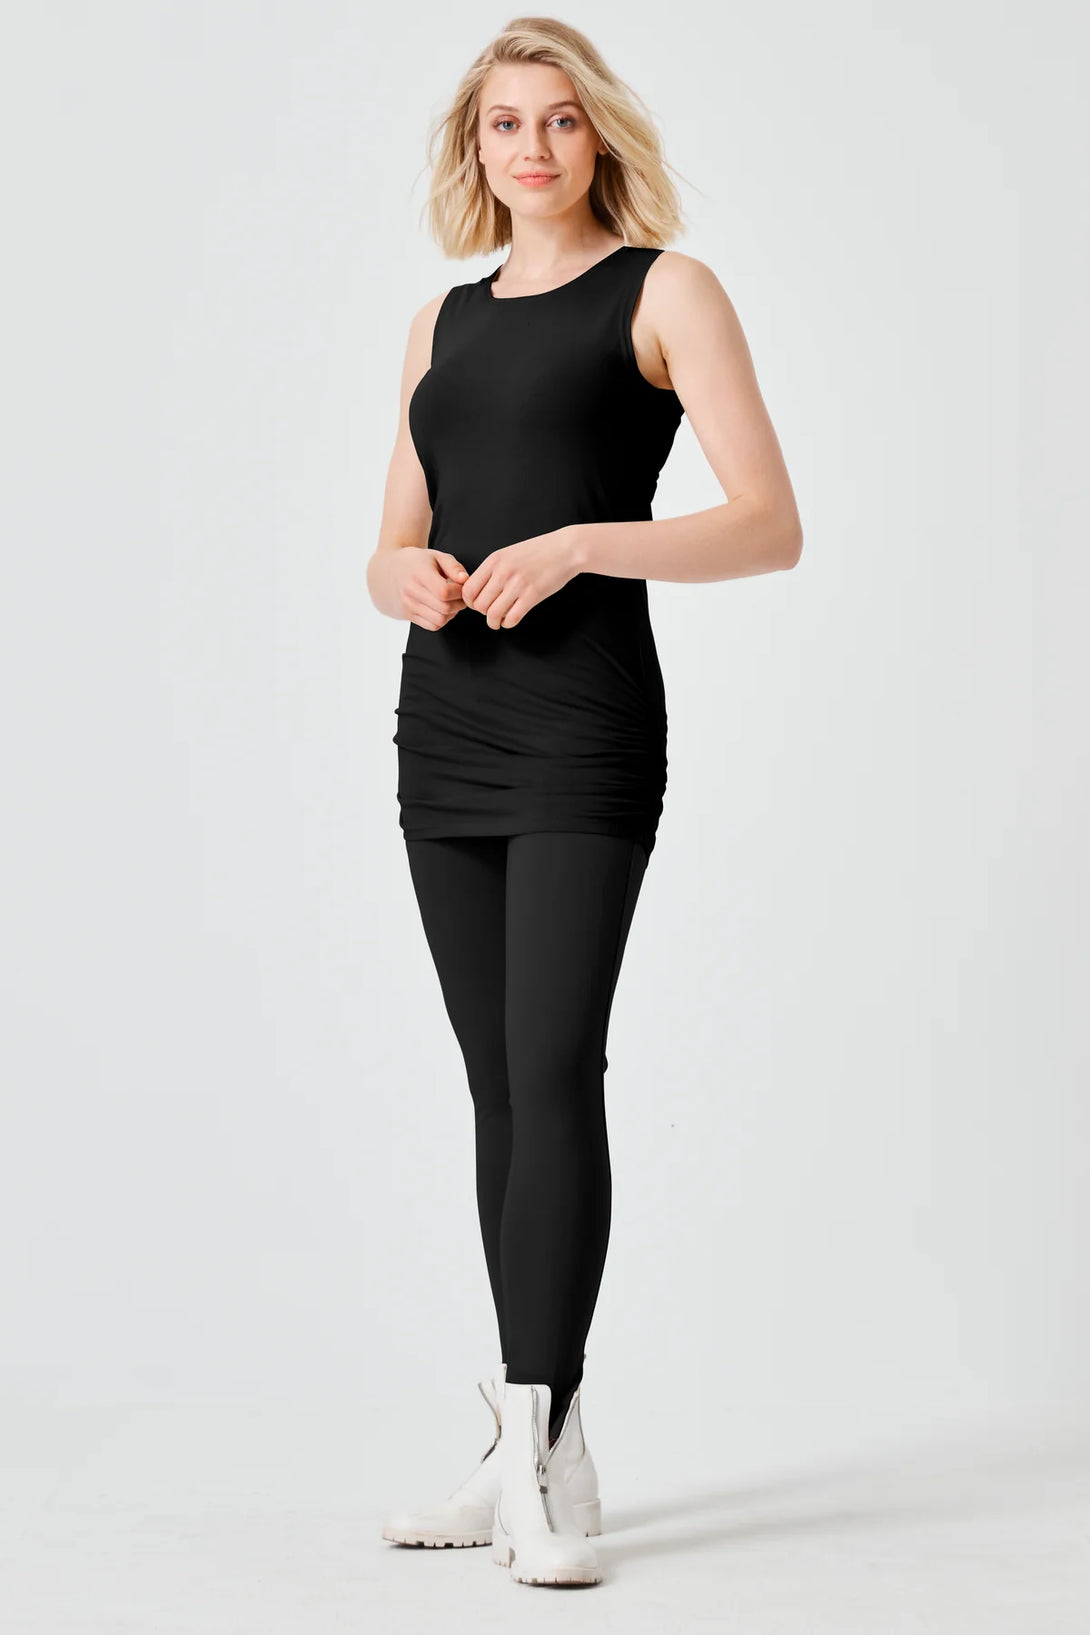 PLANET by Lauren G' Ruched Tank Black